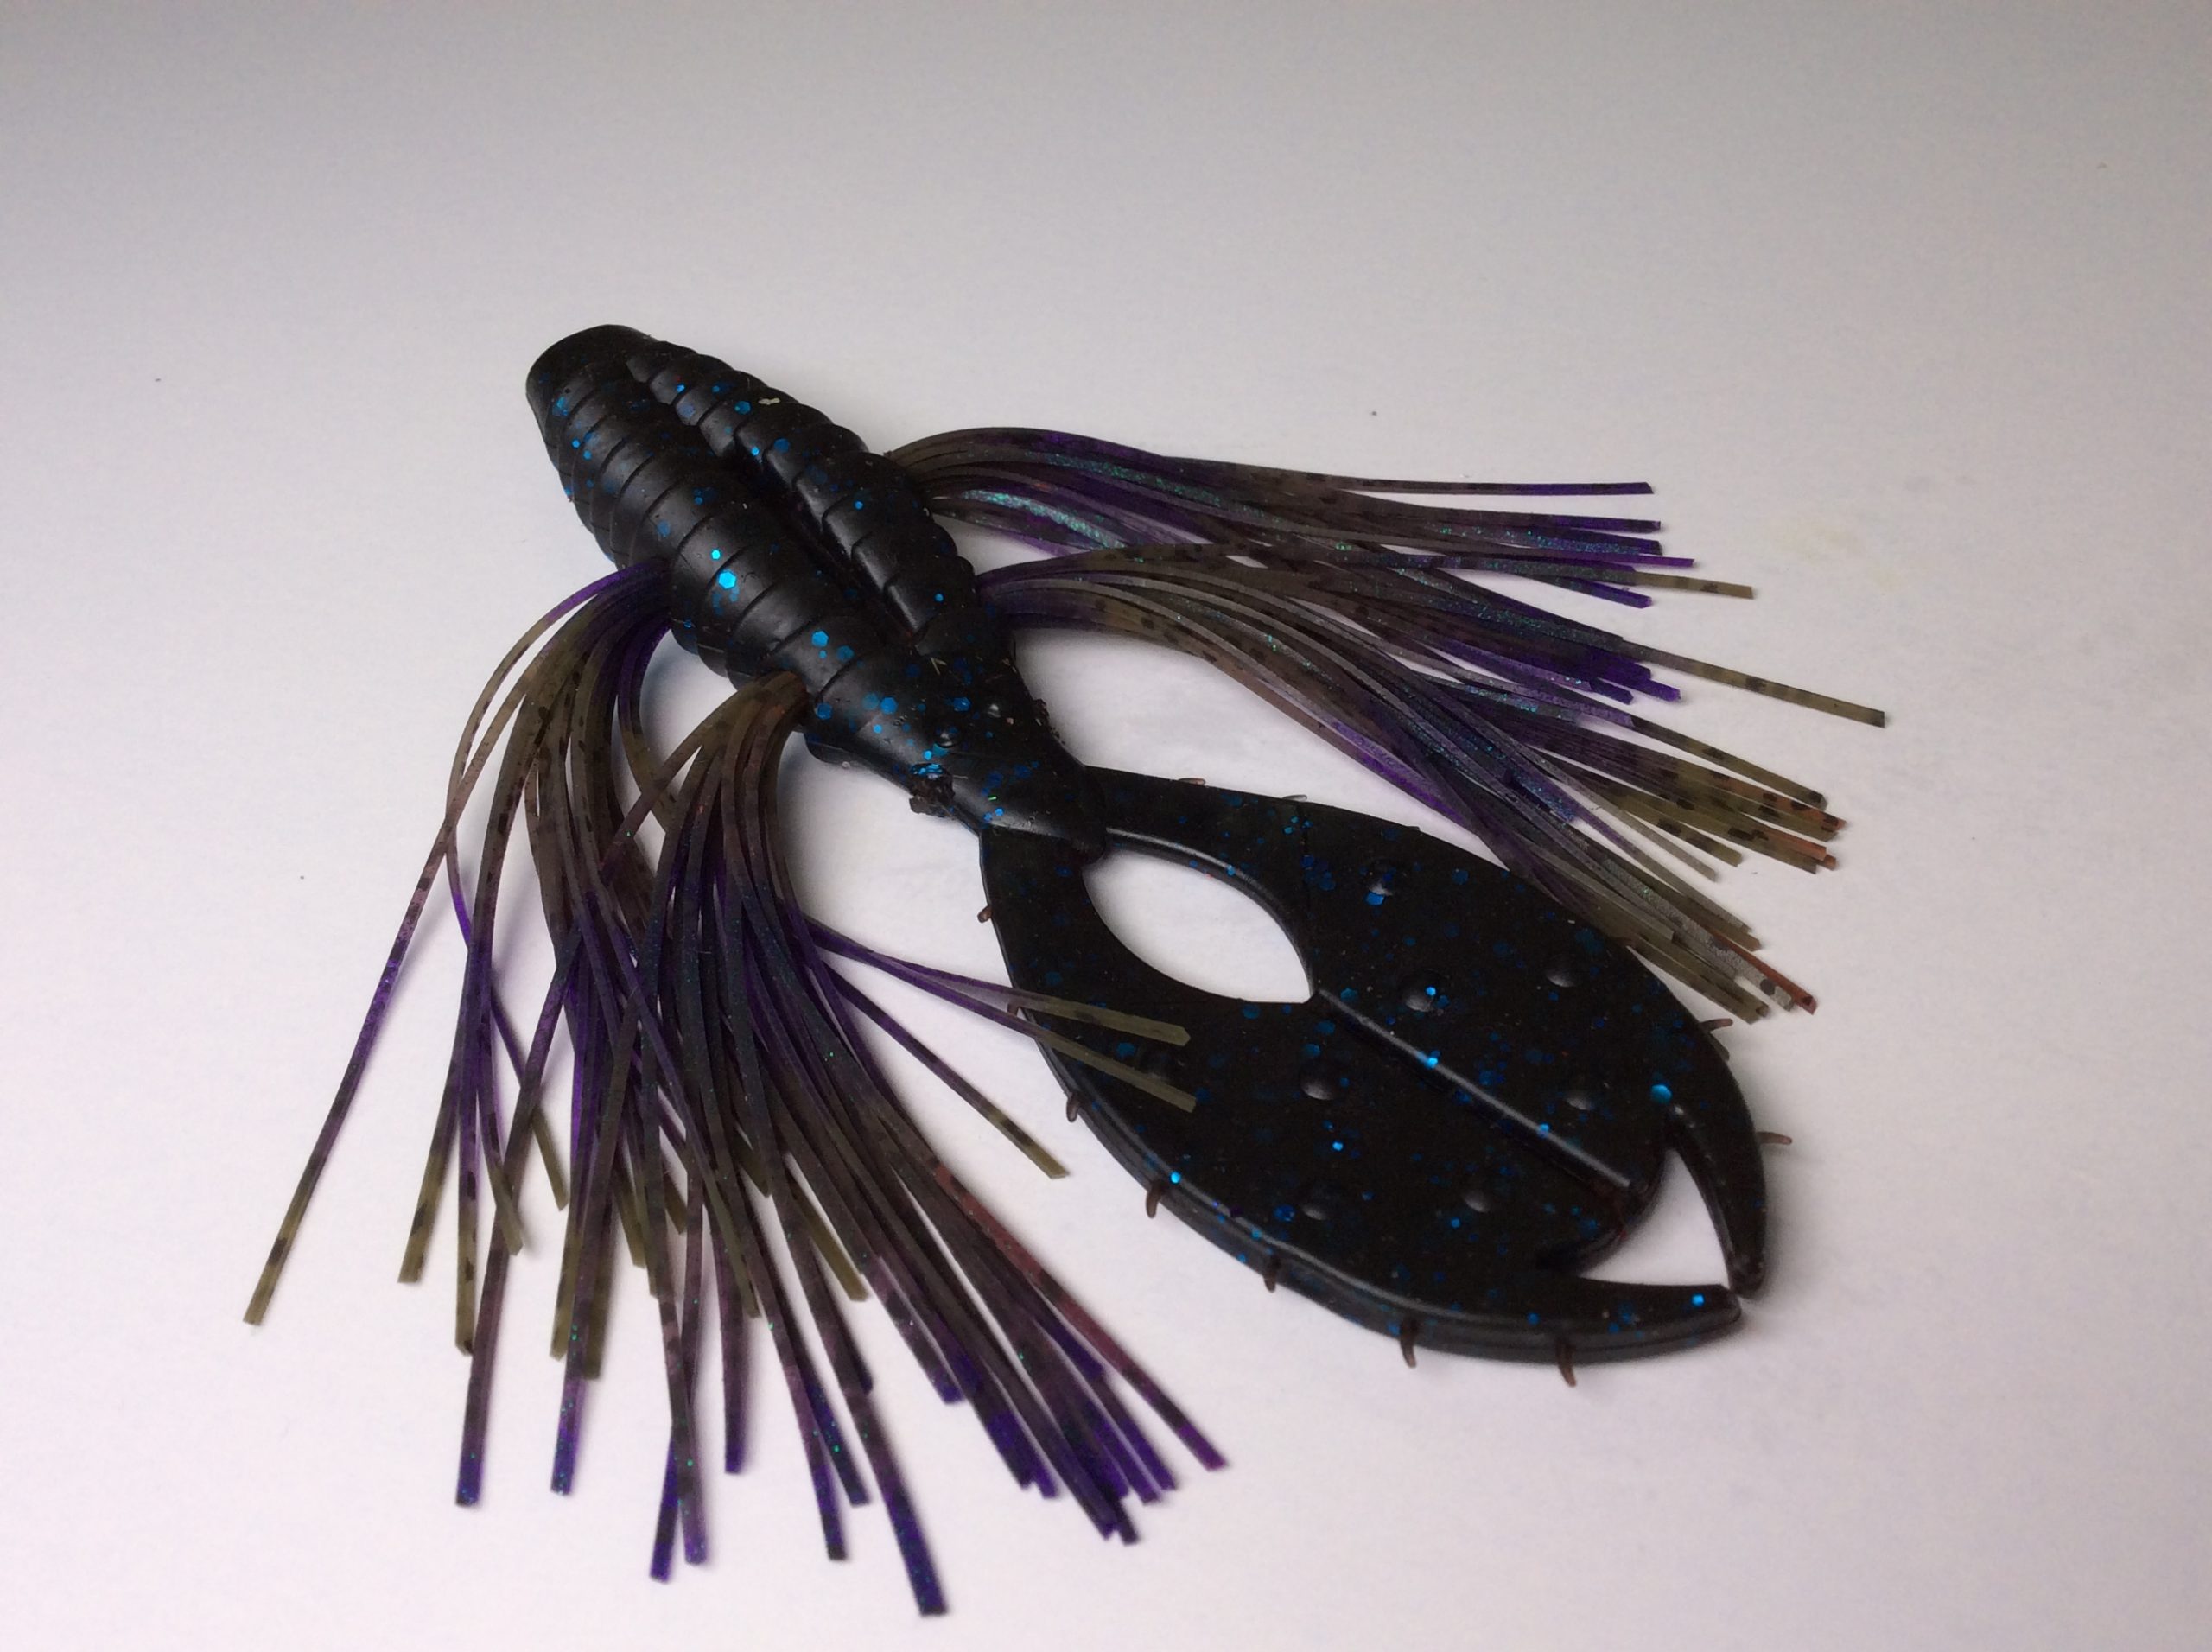 UV Whank'R Trout Worms – Tightlines UV Lures